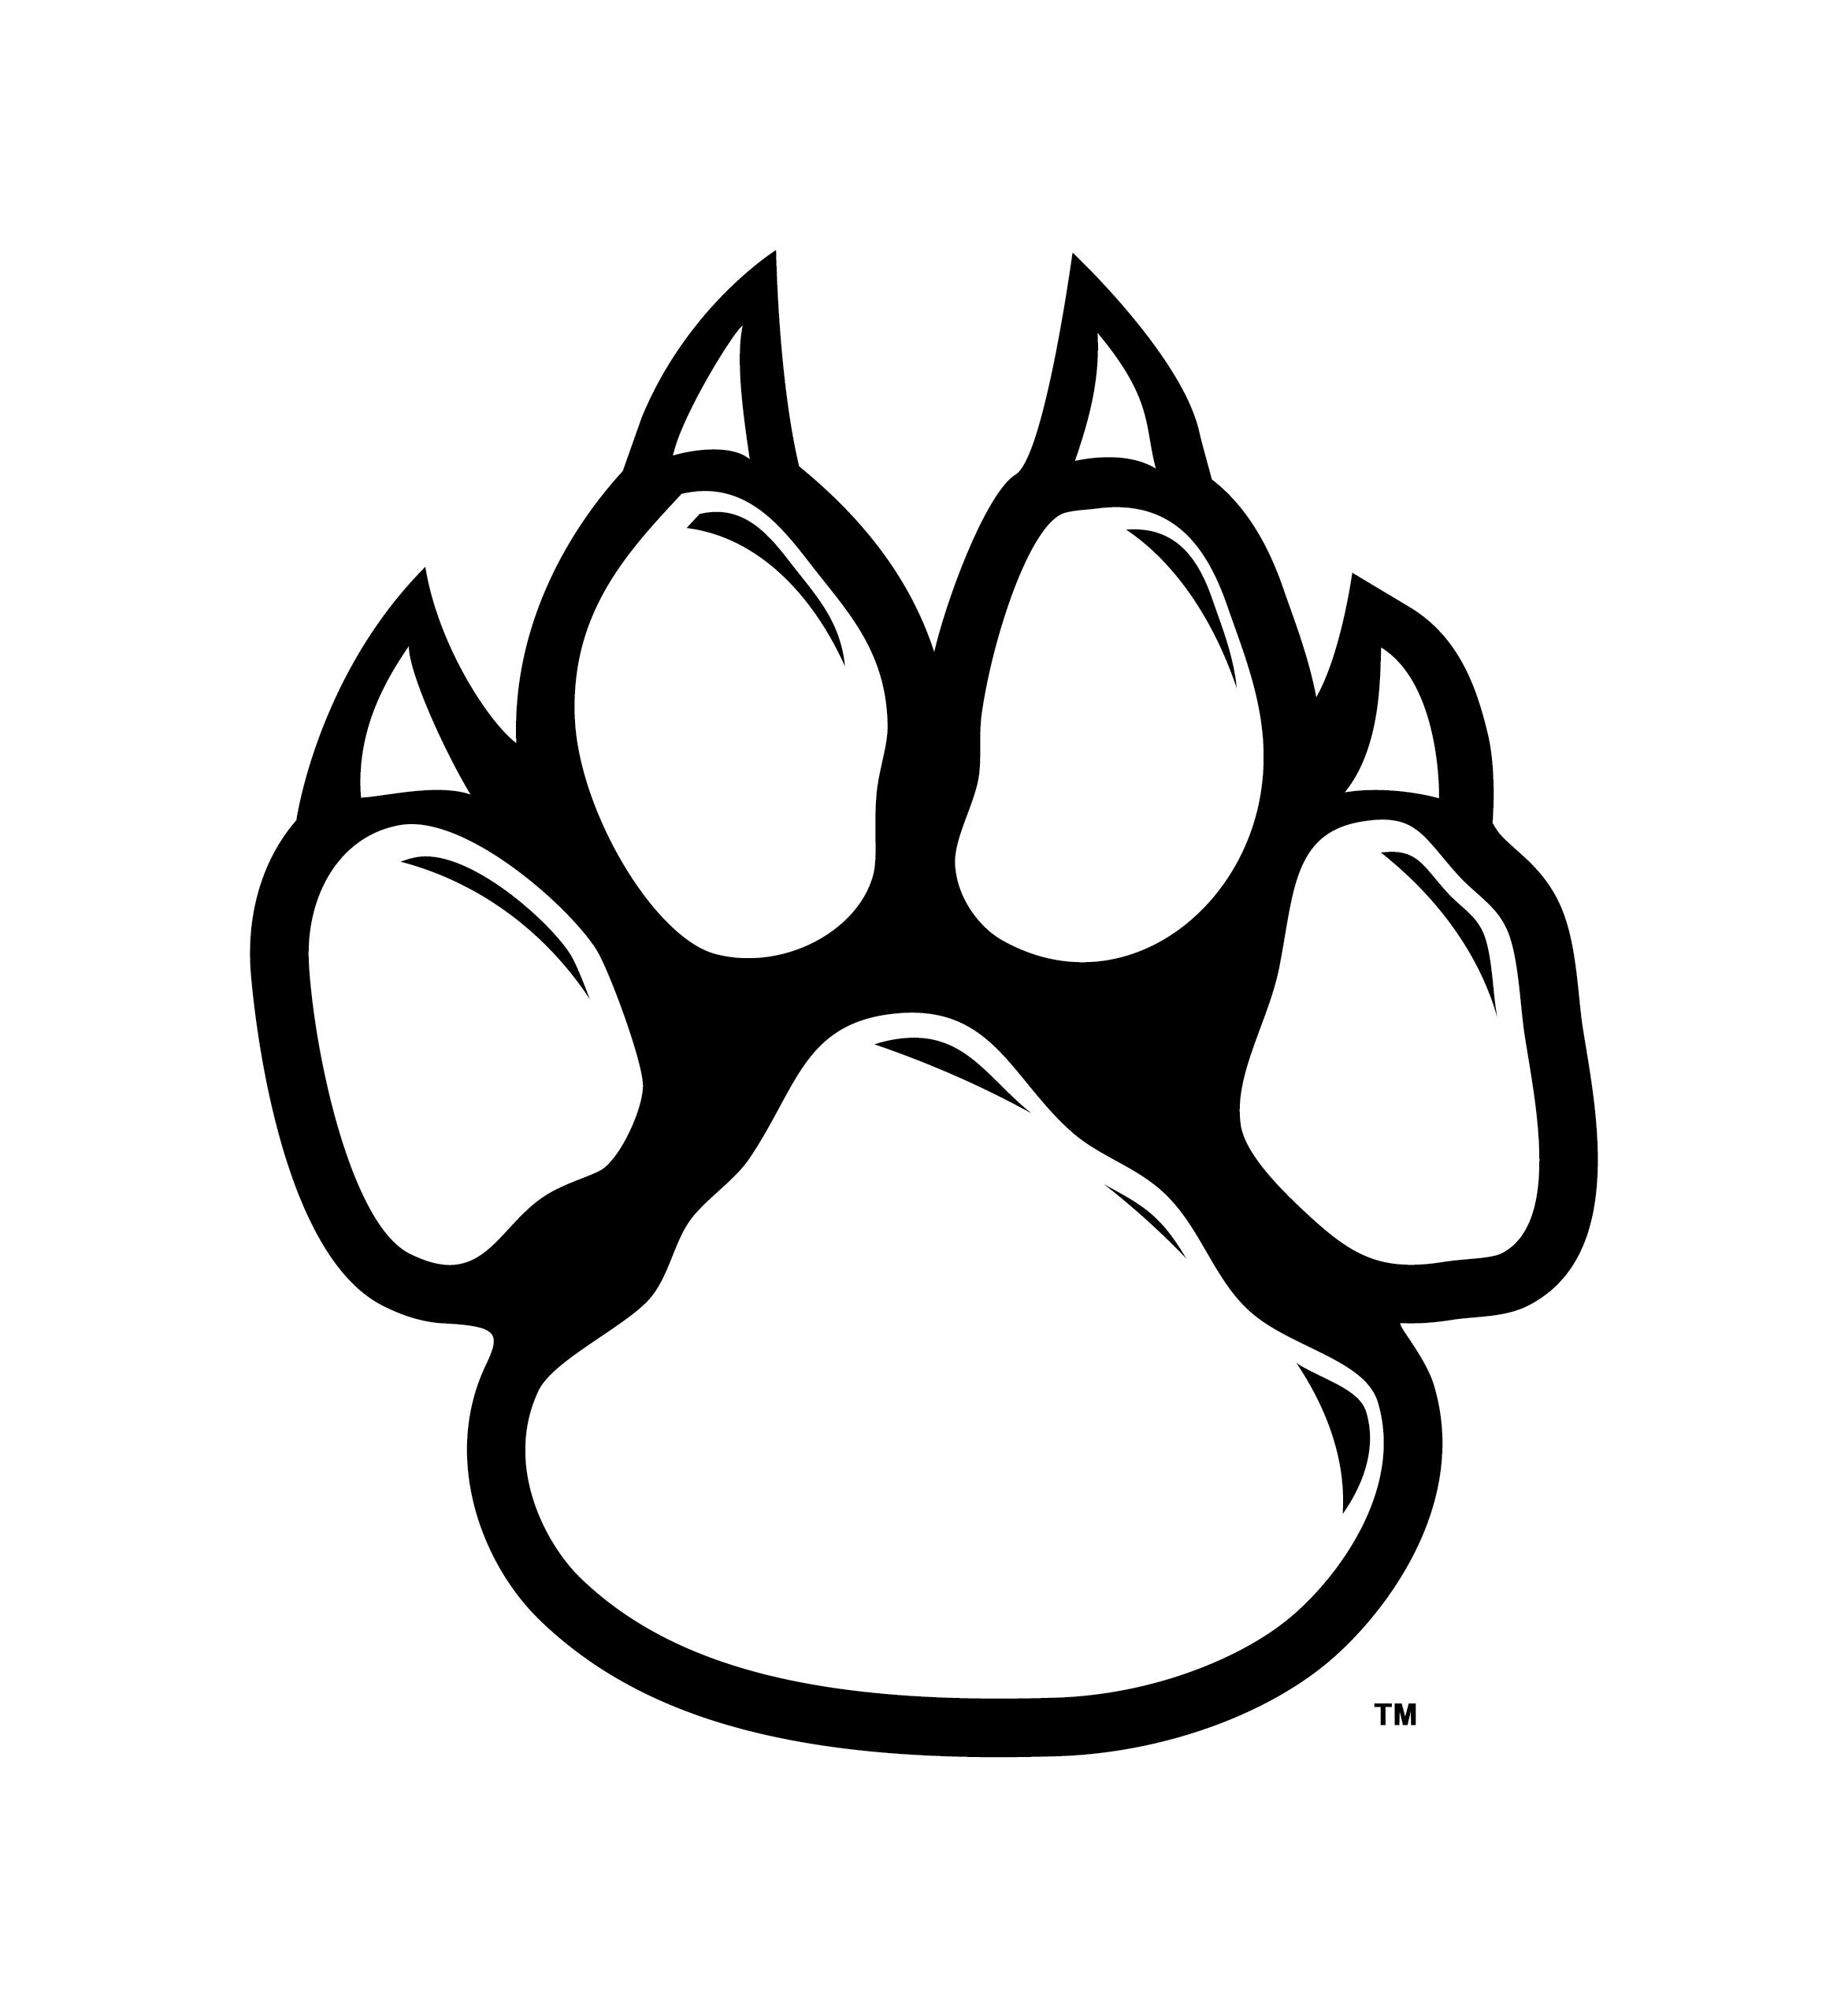 Dog paw prints wolf paw print clipart clipartxtras